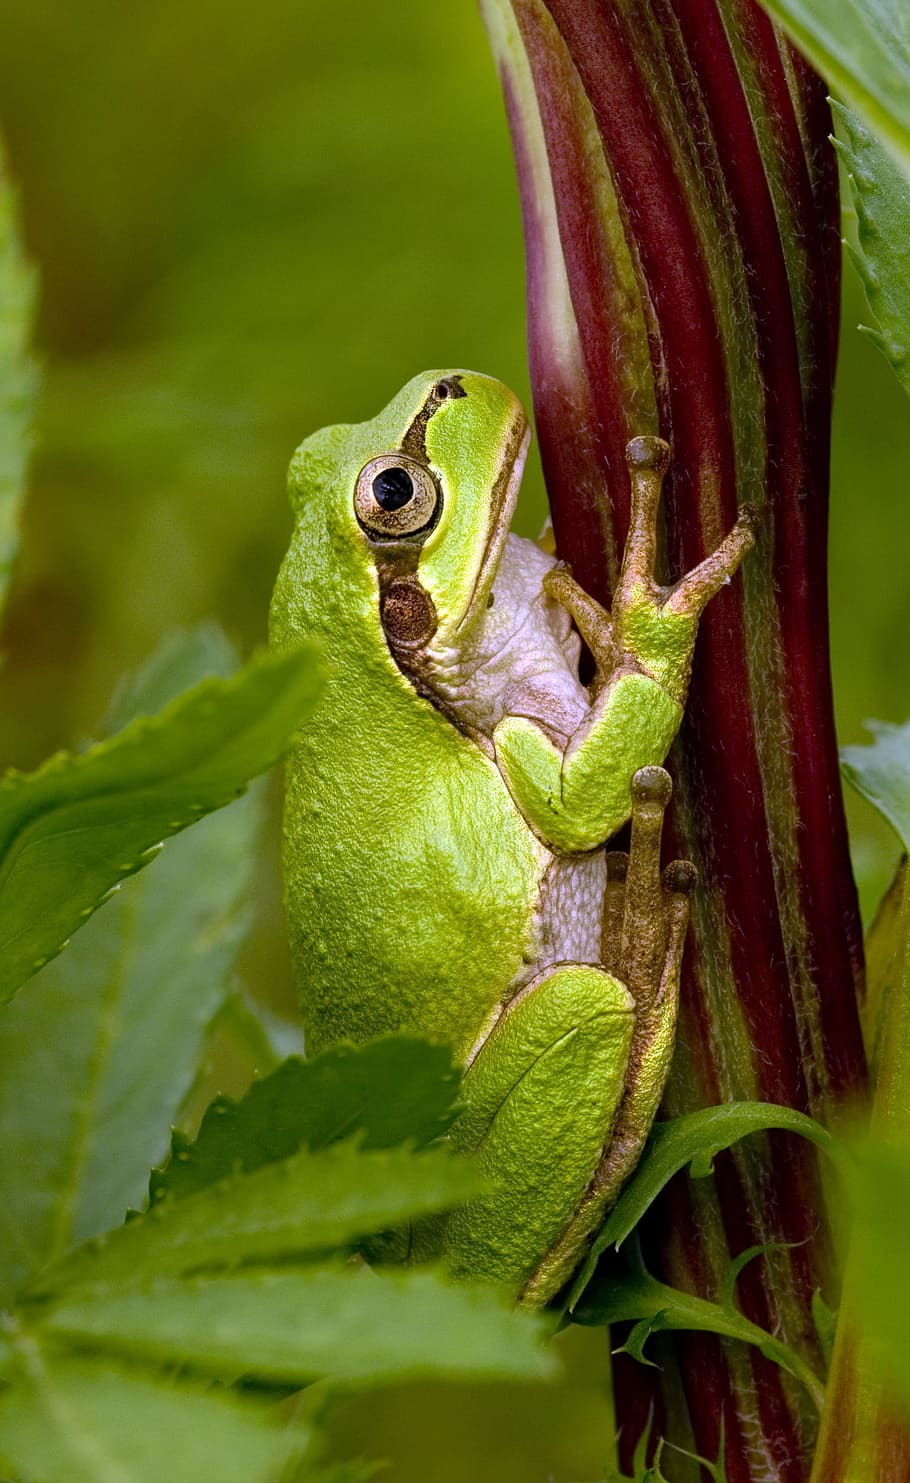 green frog on green leafed plant, Japanese Tree Frog, hyla japonica